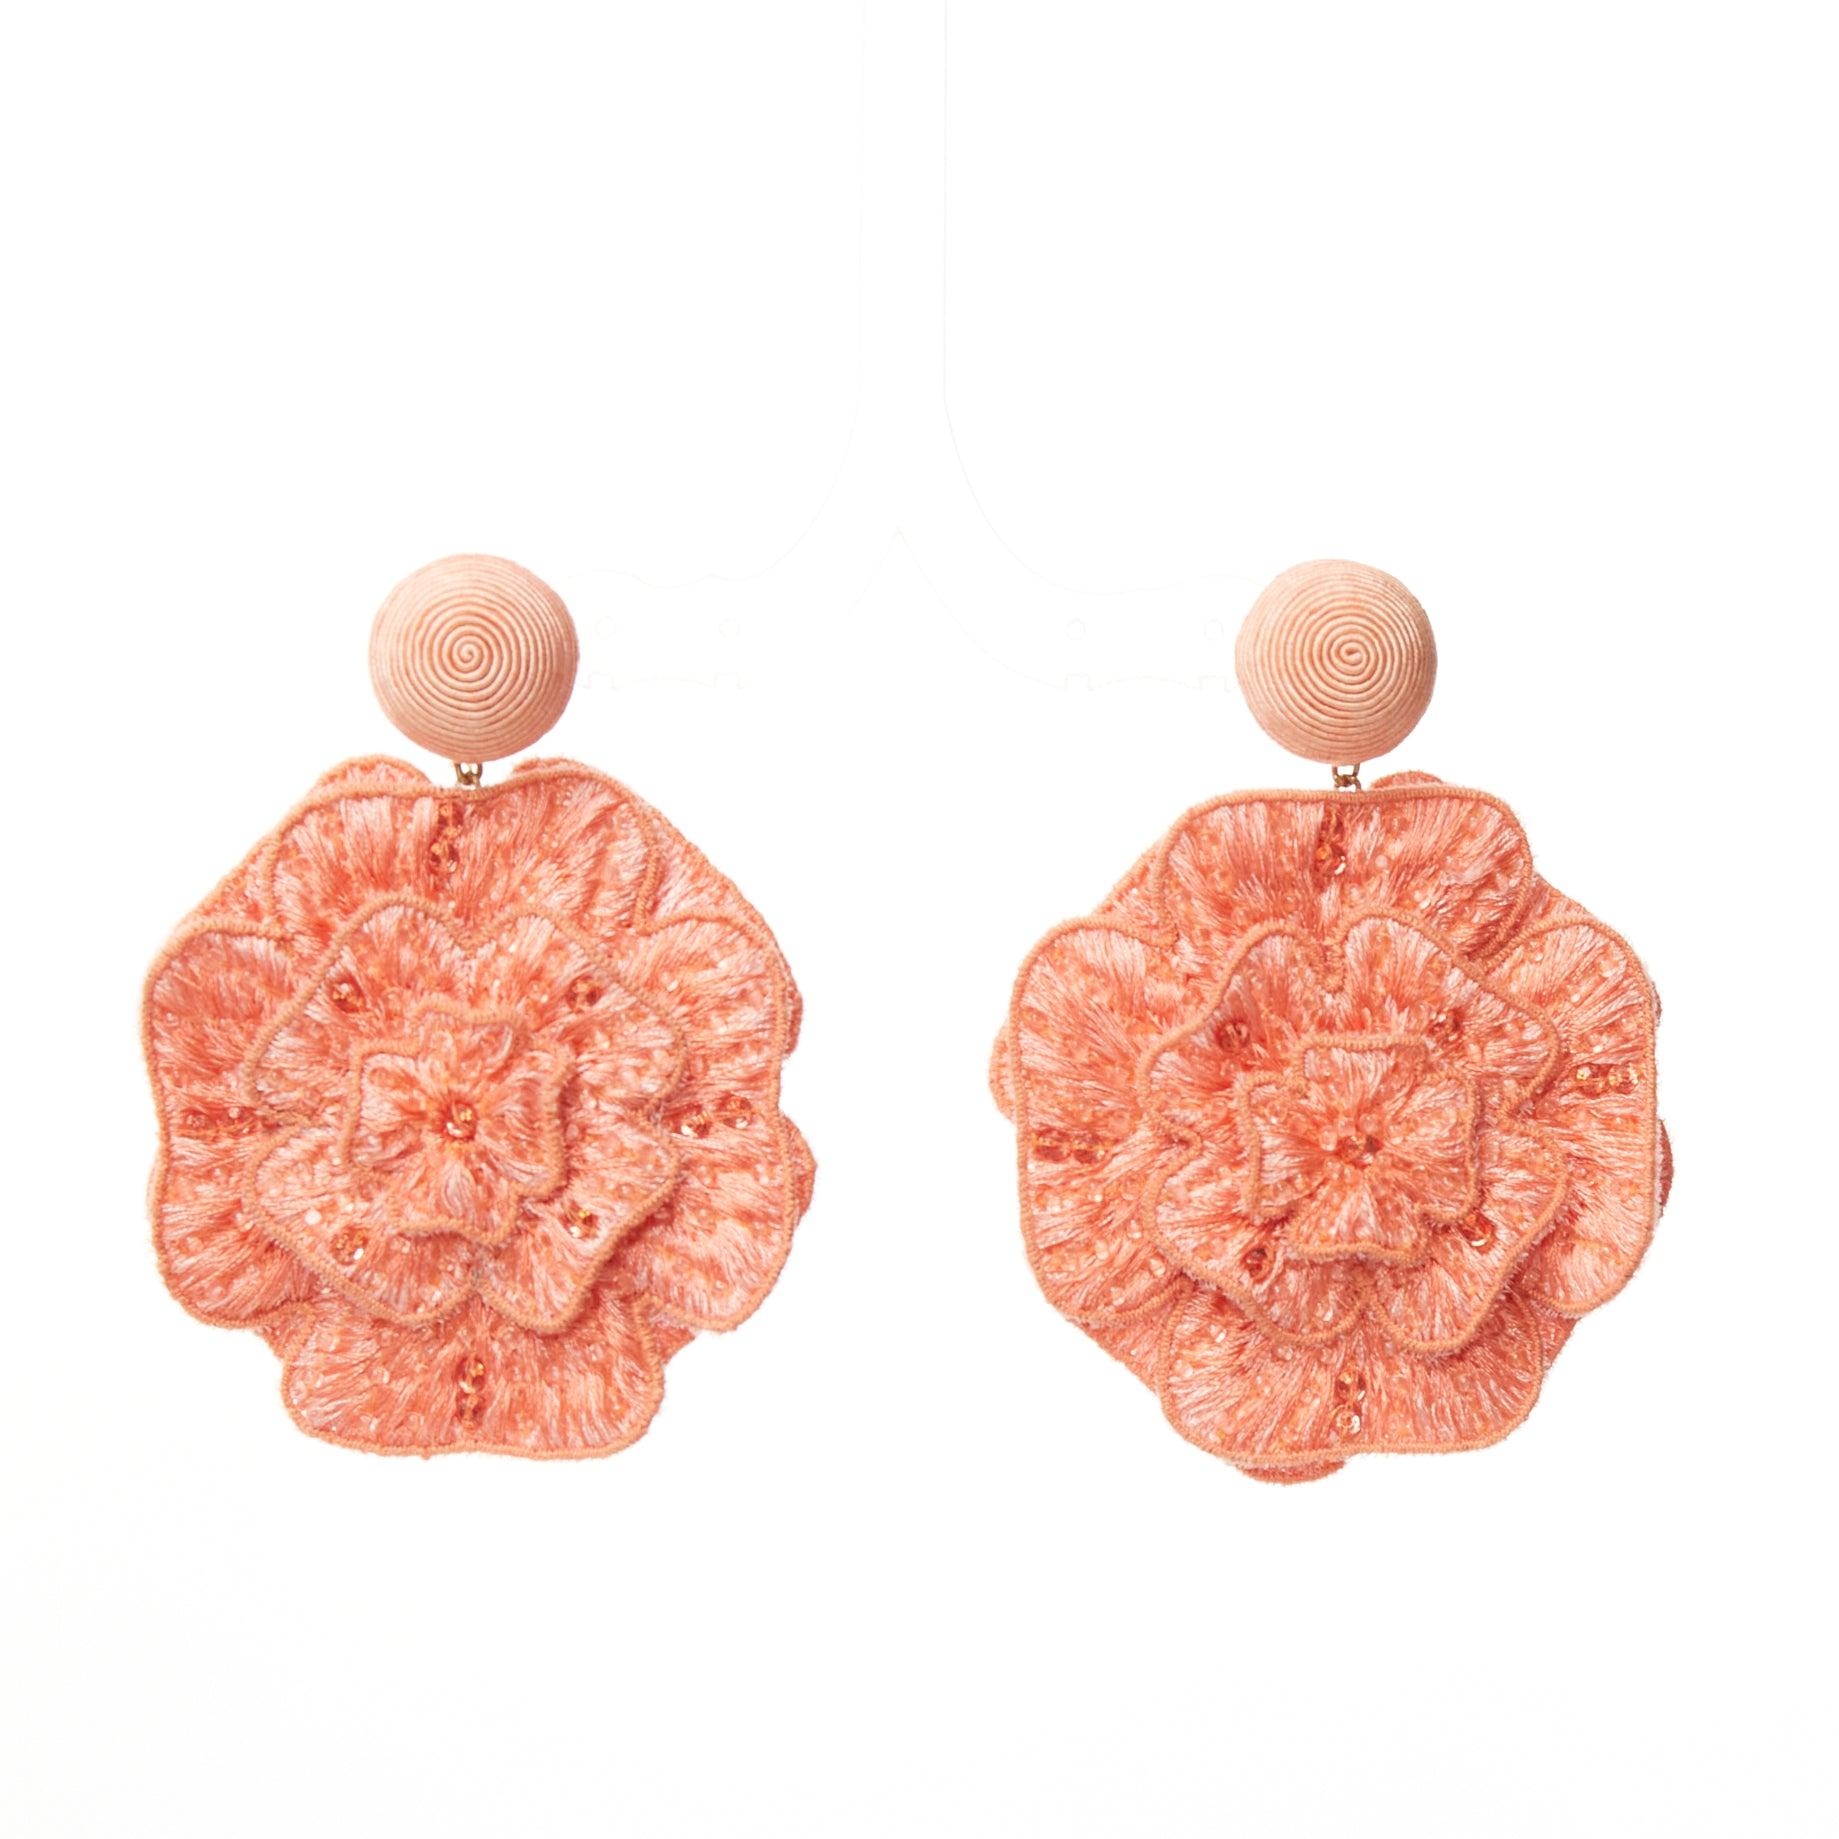 REBECCA DE RAVENEL peach pink floral beaded applique drop pin earrings
Reference: AAWC/A01260
Brand: Rebecca De Ravenel
Material: Fabric
Color: Pink, Gold
Pattern: Floral
Closure: Pin
Lining: Gold Metal
Made in: India

CONDITION:
Condition: